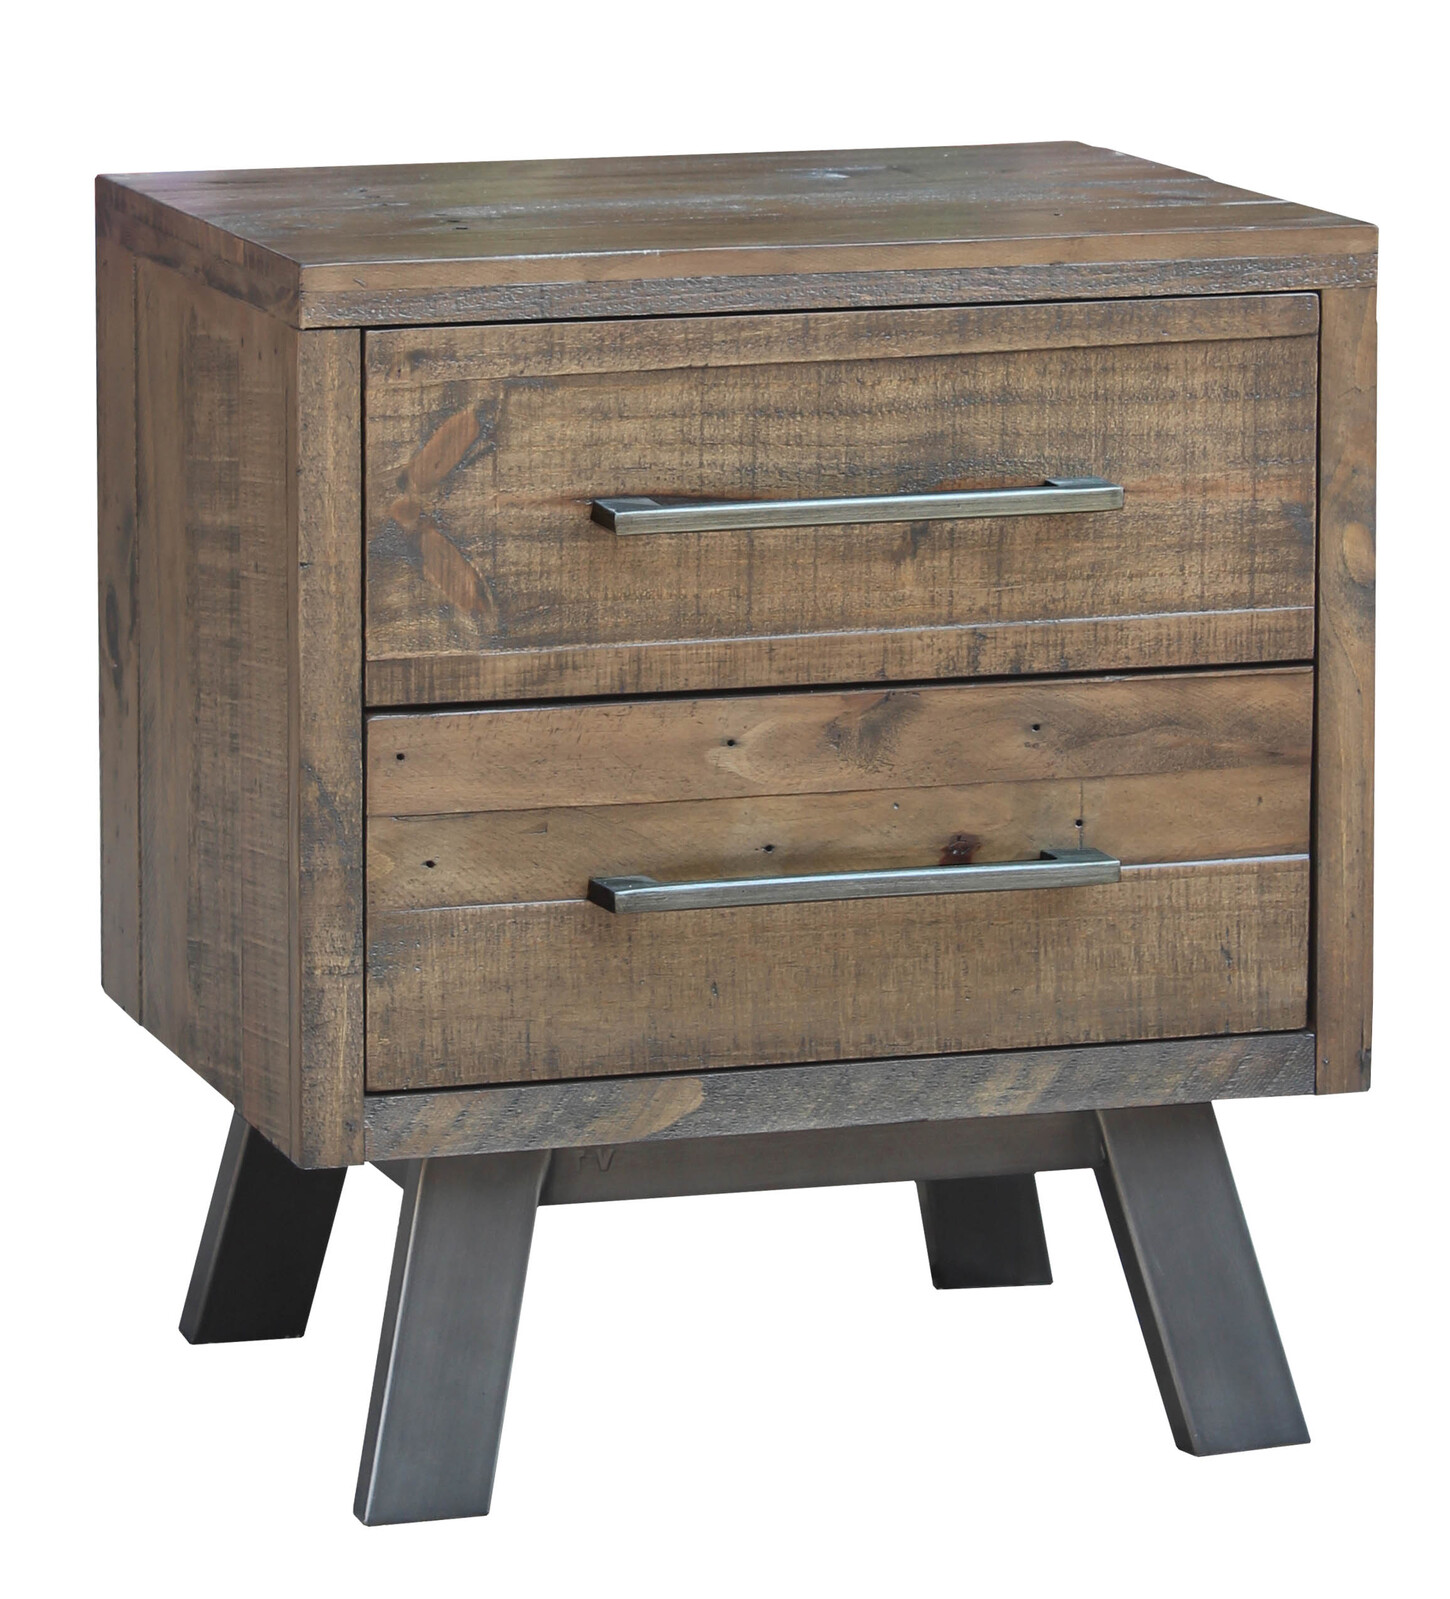 Homefurn Bedside Table 3 Drawer Chest of Drawers Timber 500 x 425 x 600H Paterson 6716 PBT